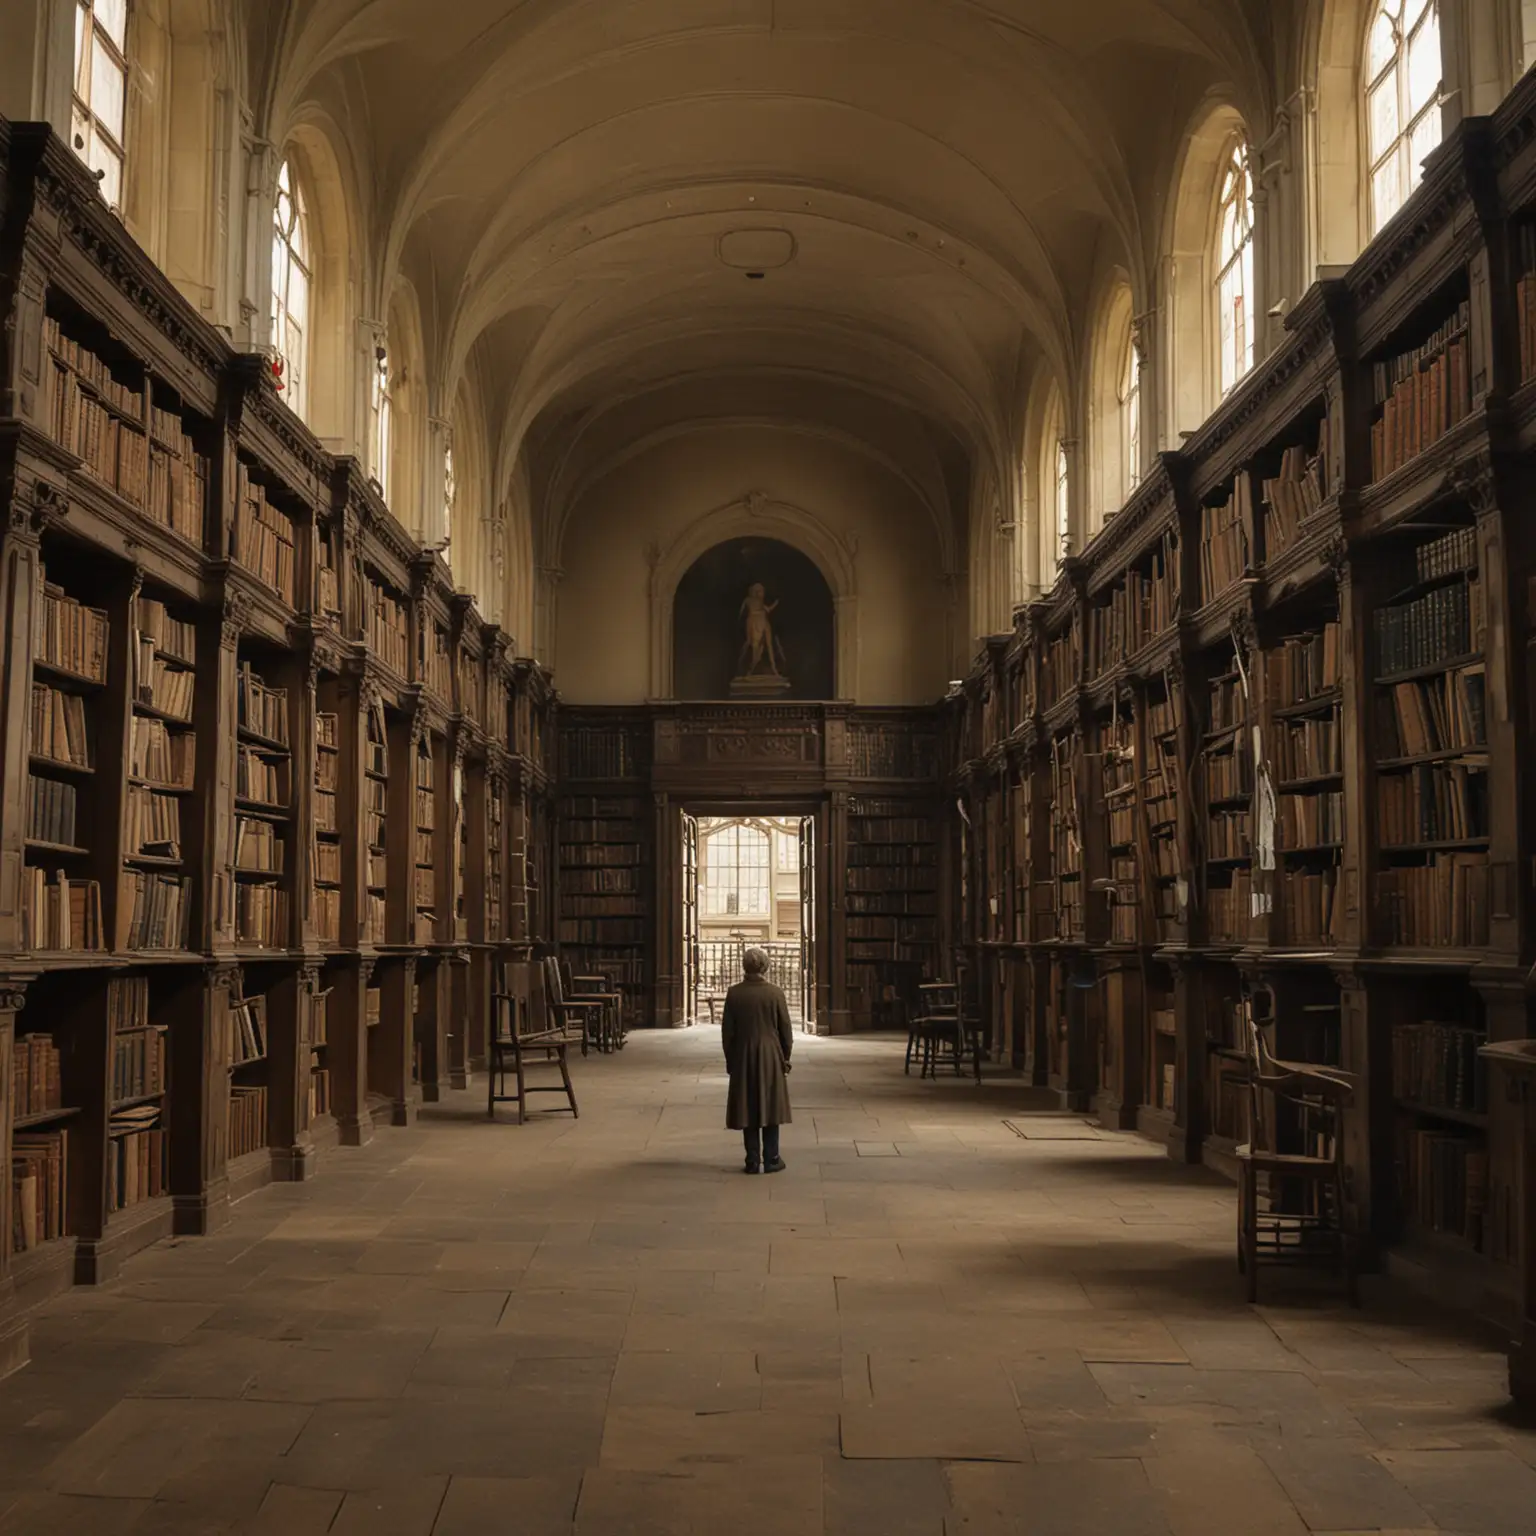 the interior of an old library, a lone figure standing in the middle